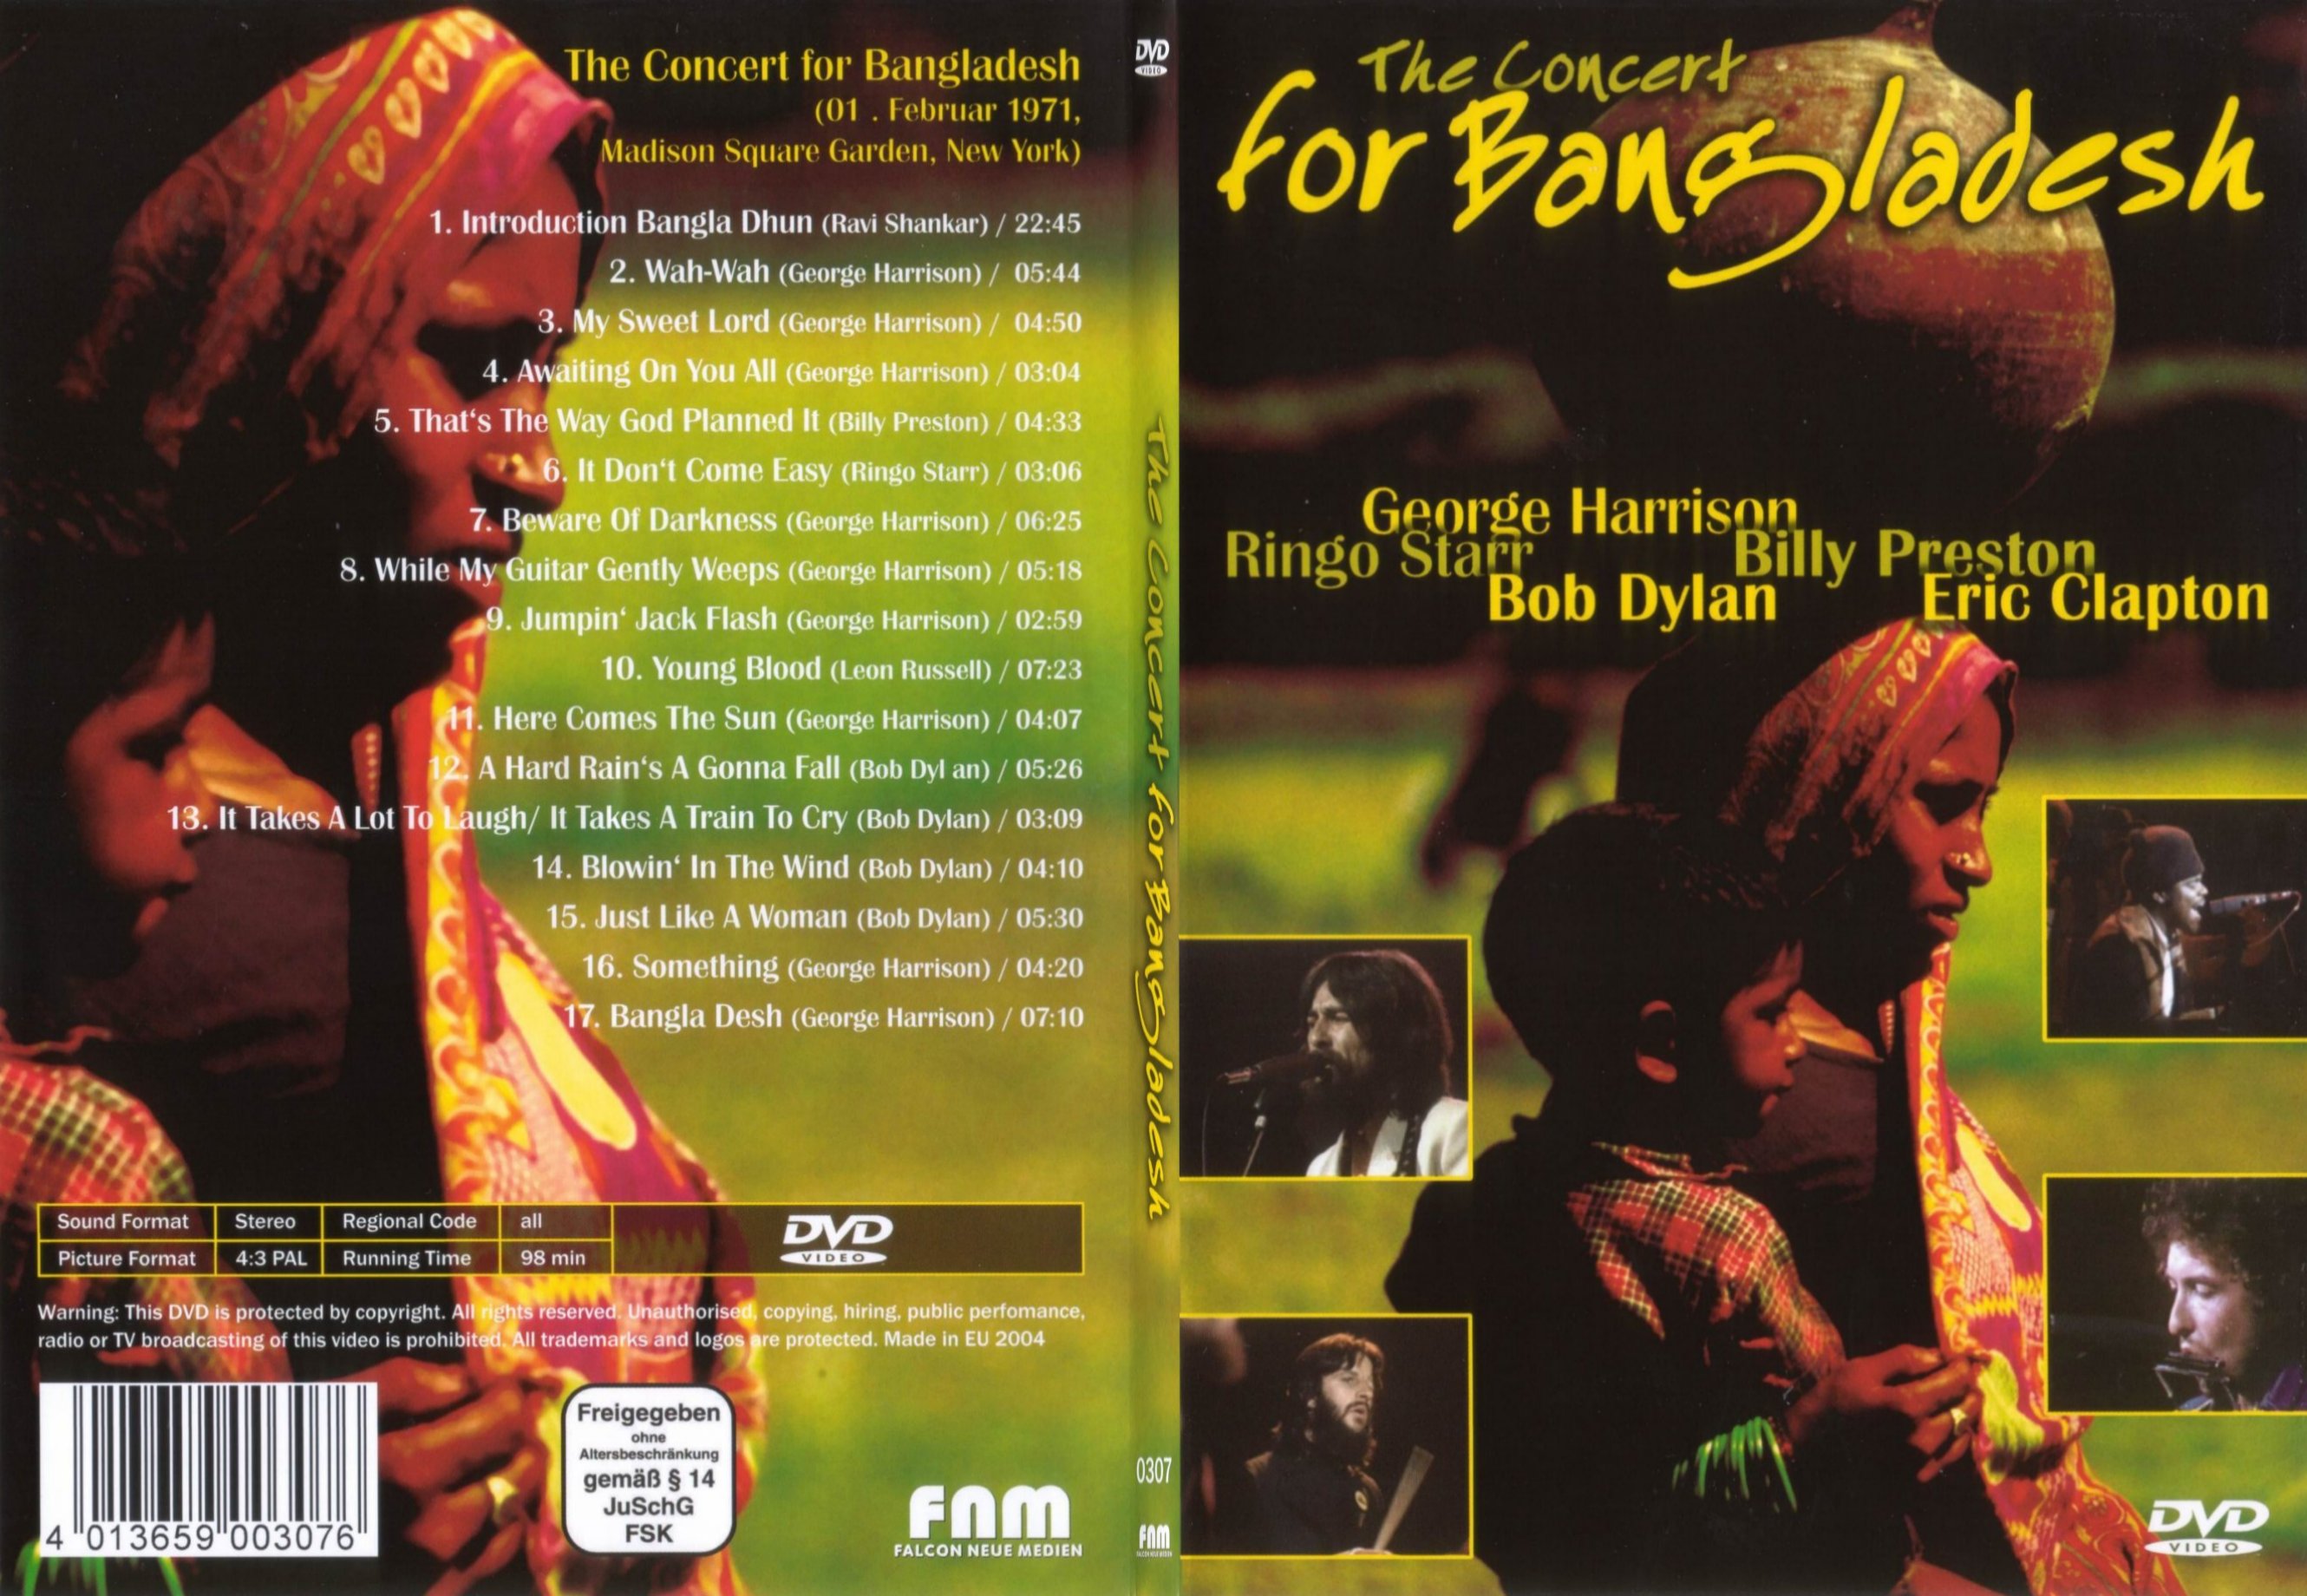 Jaquette DVD The concert for Bangladesh - SLIM